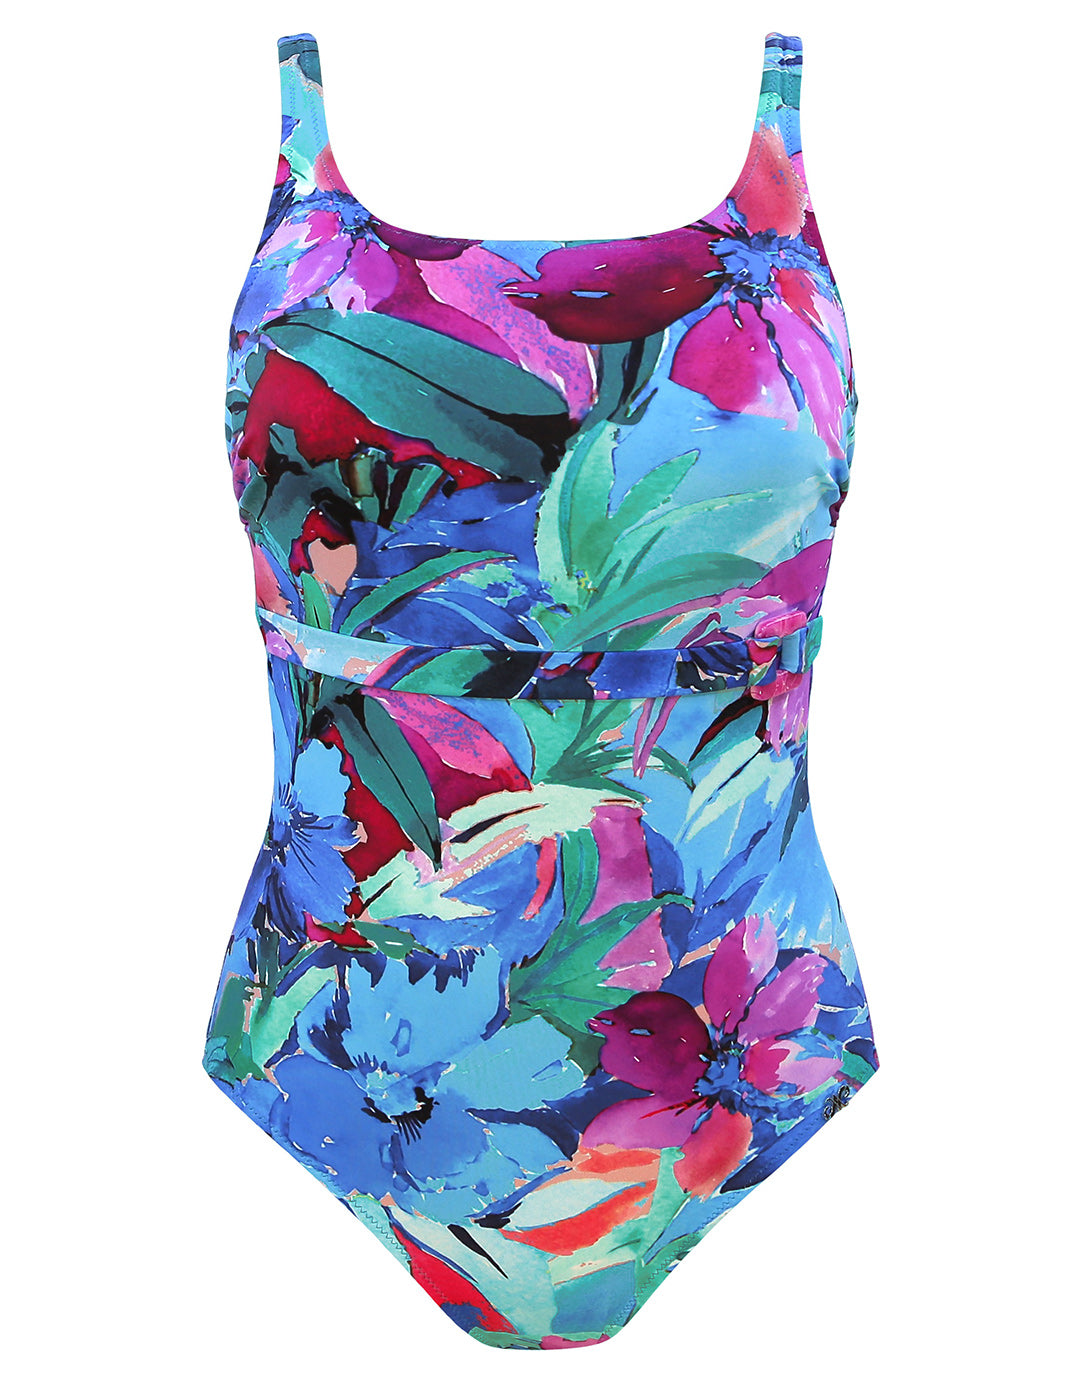 Malena High Front Swimsuit - Turquoise - Simply Beach UK